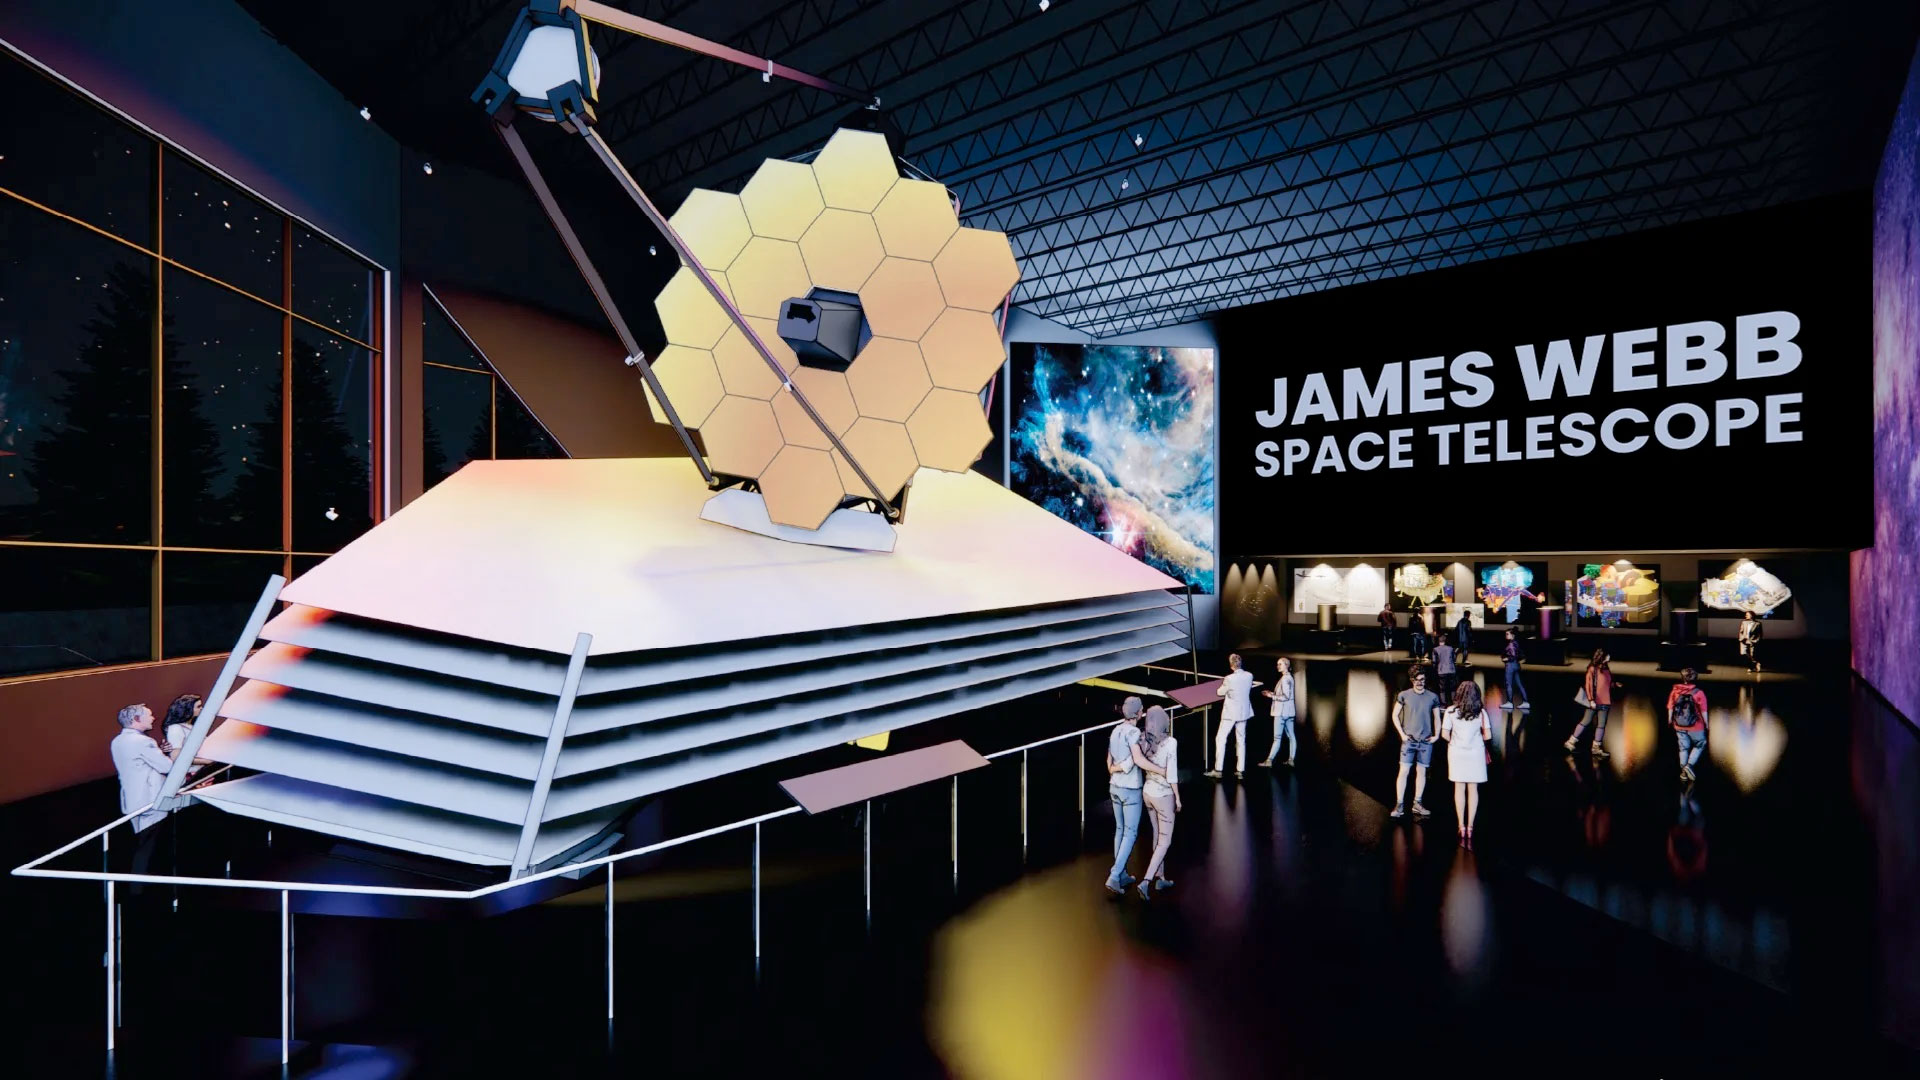 James Webb Space Telescope full-size model to be displayed by Space Foundation Space